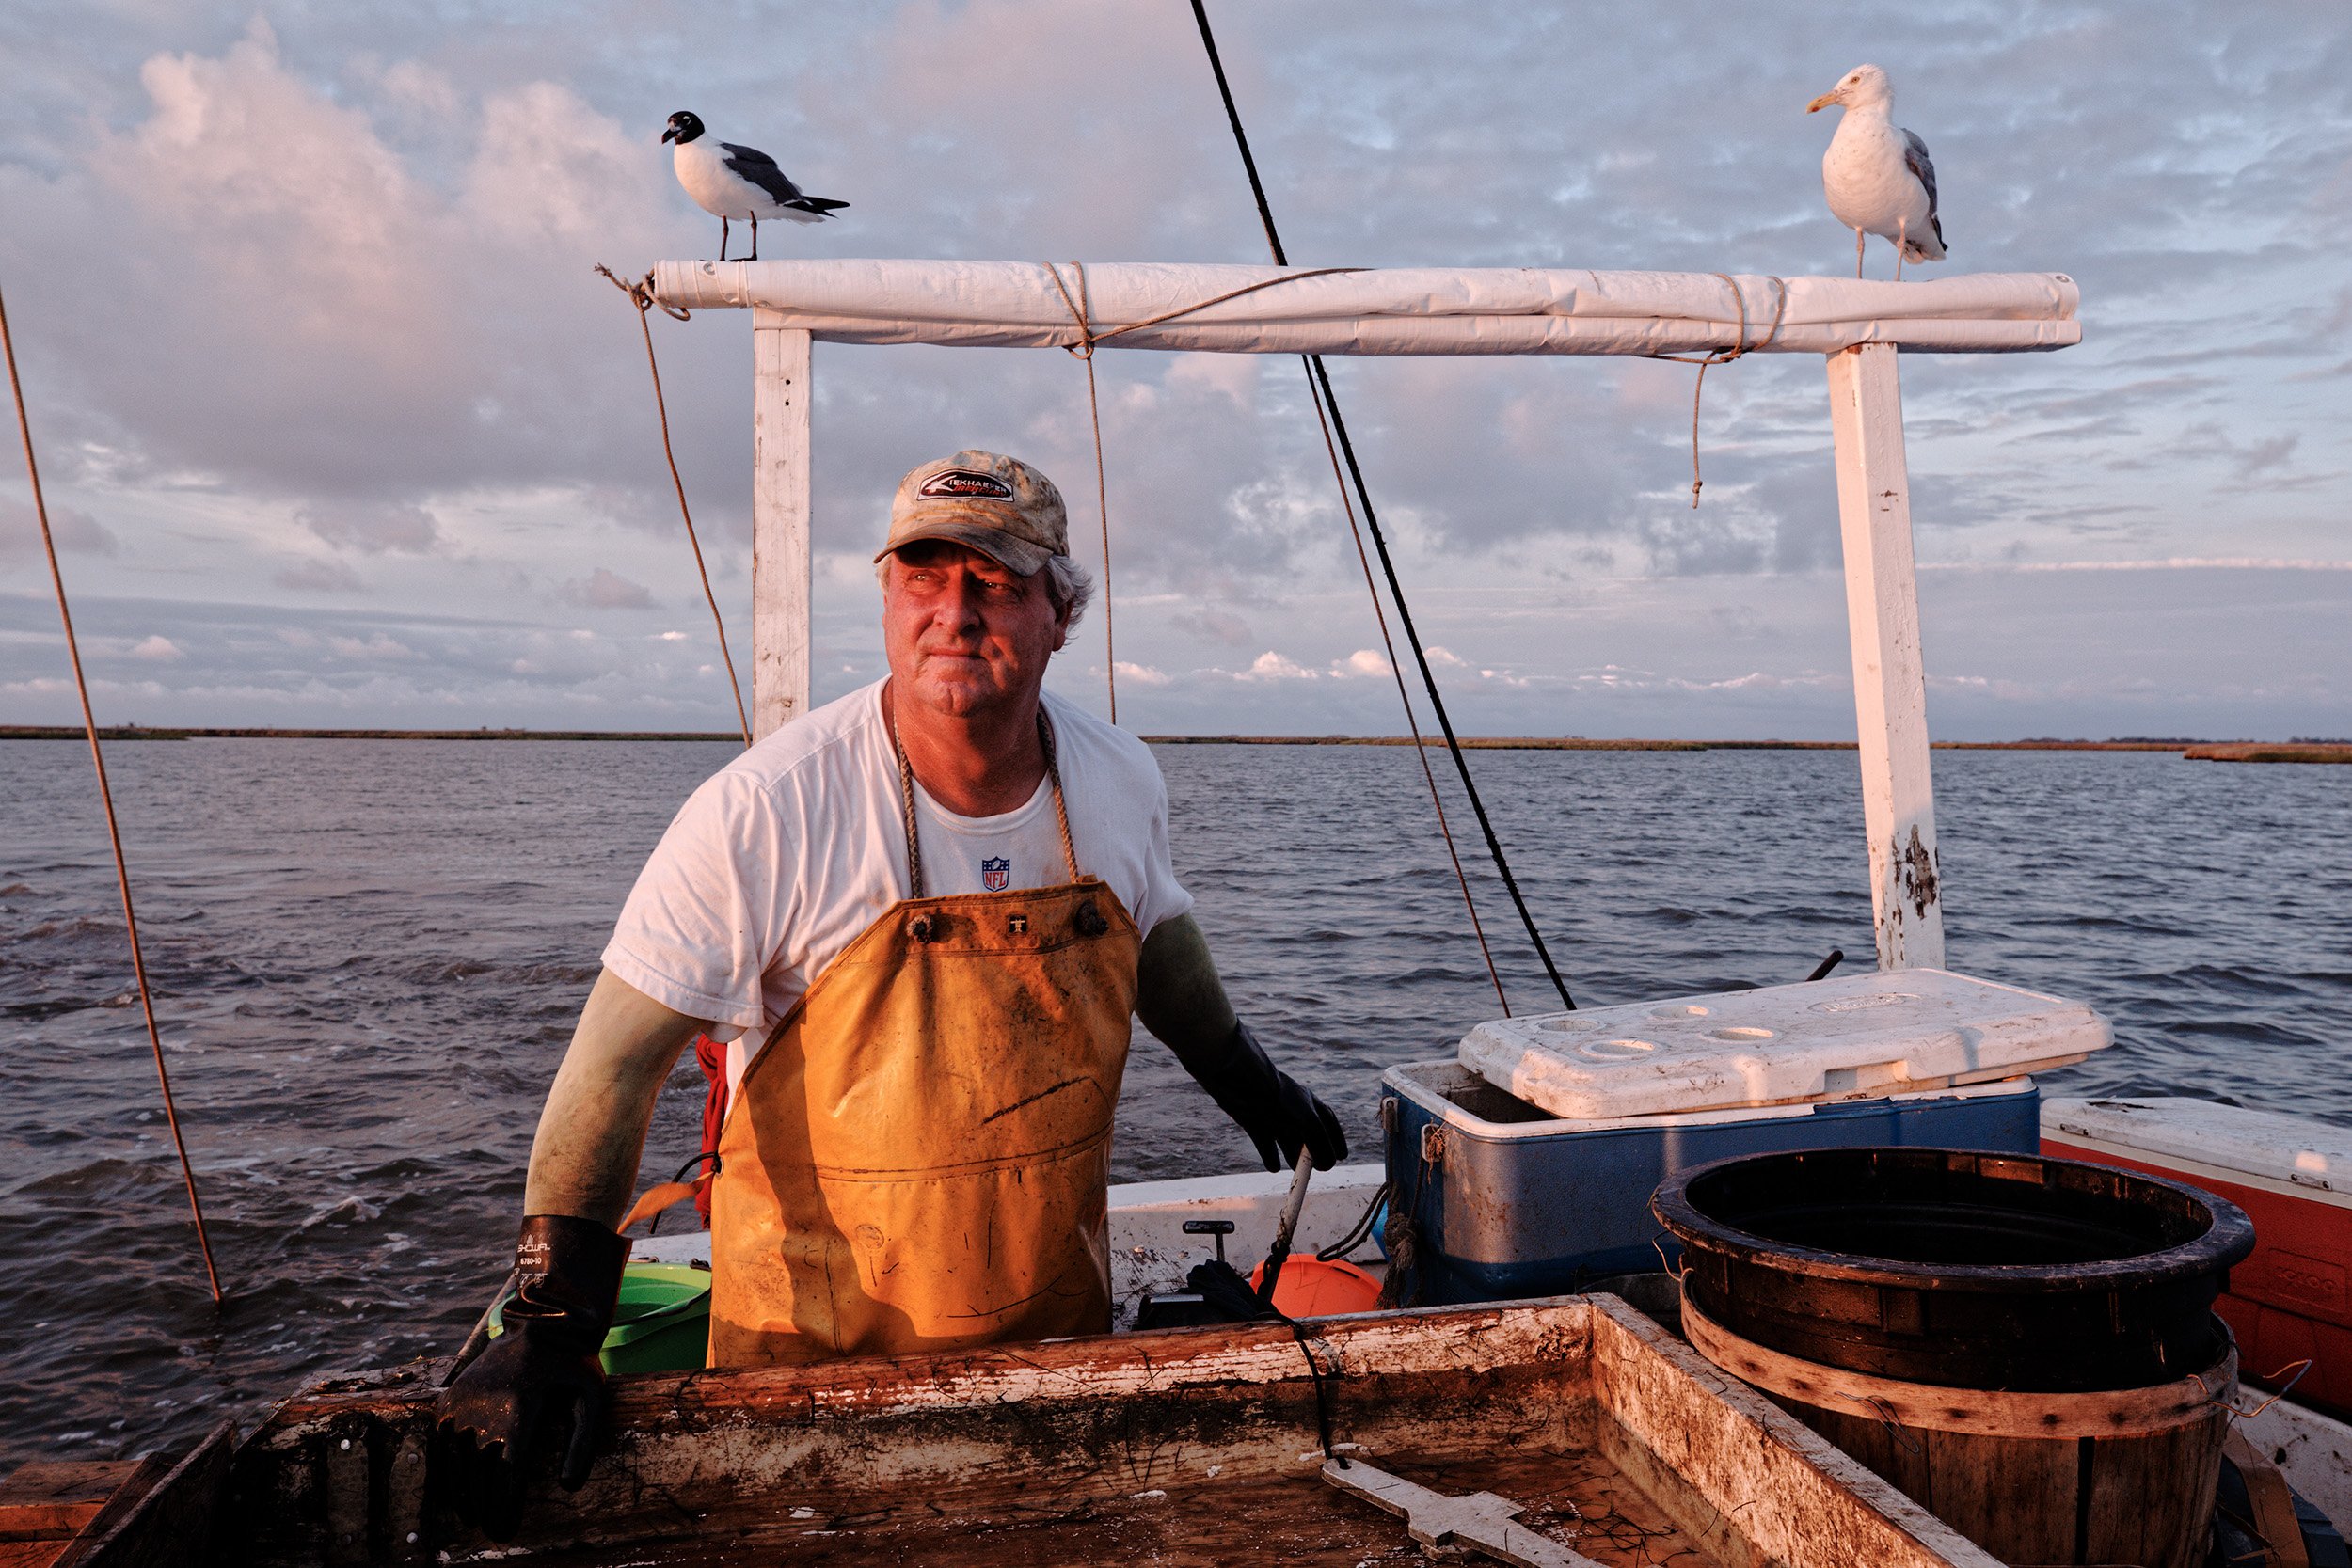  Mark Kitching looks out at his scraper while crabbing at dawn around the waters of Smith Island. Kitching relies on years of first-hand observation and local knowledge to weather the unpredictability of good and bad fishing years. “It’s an industry 